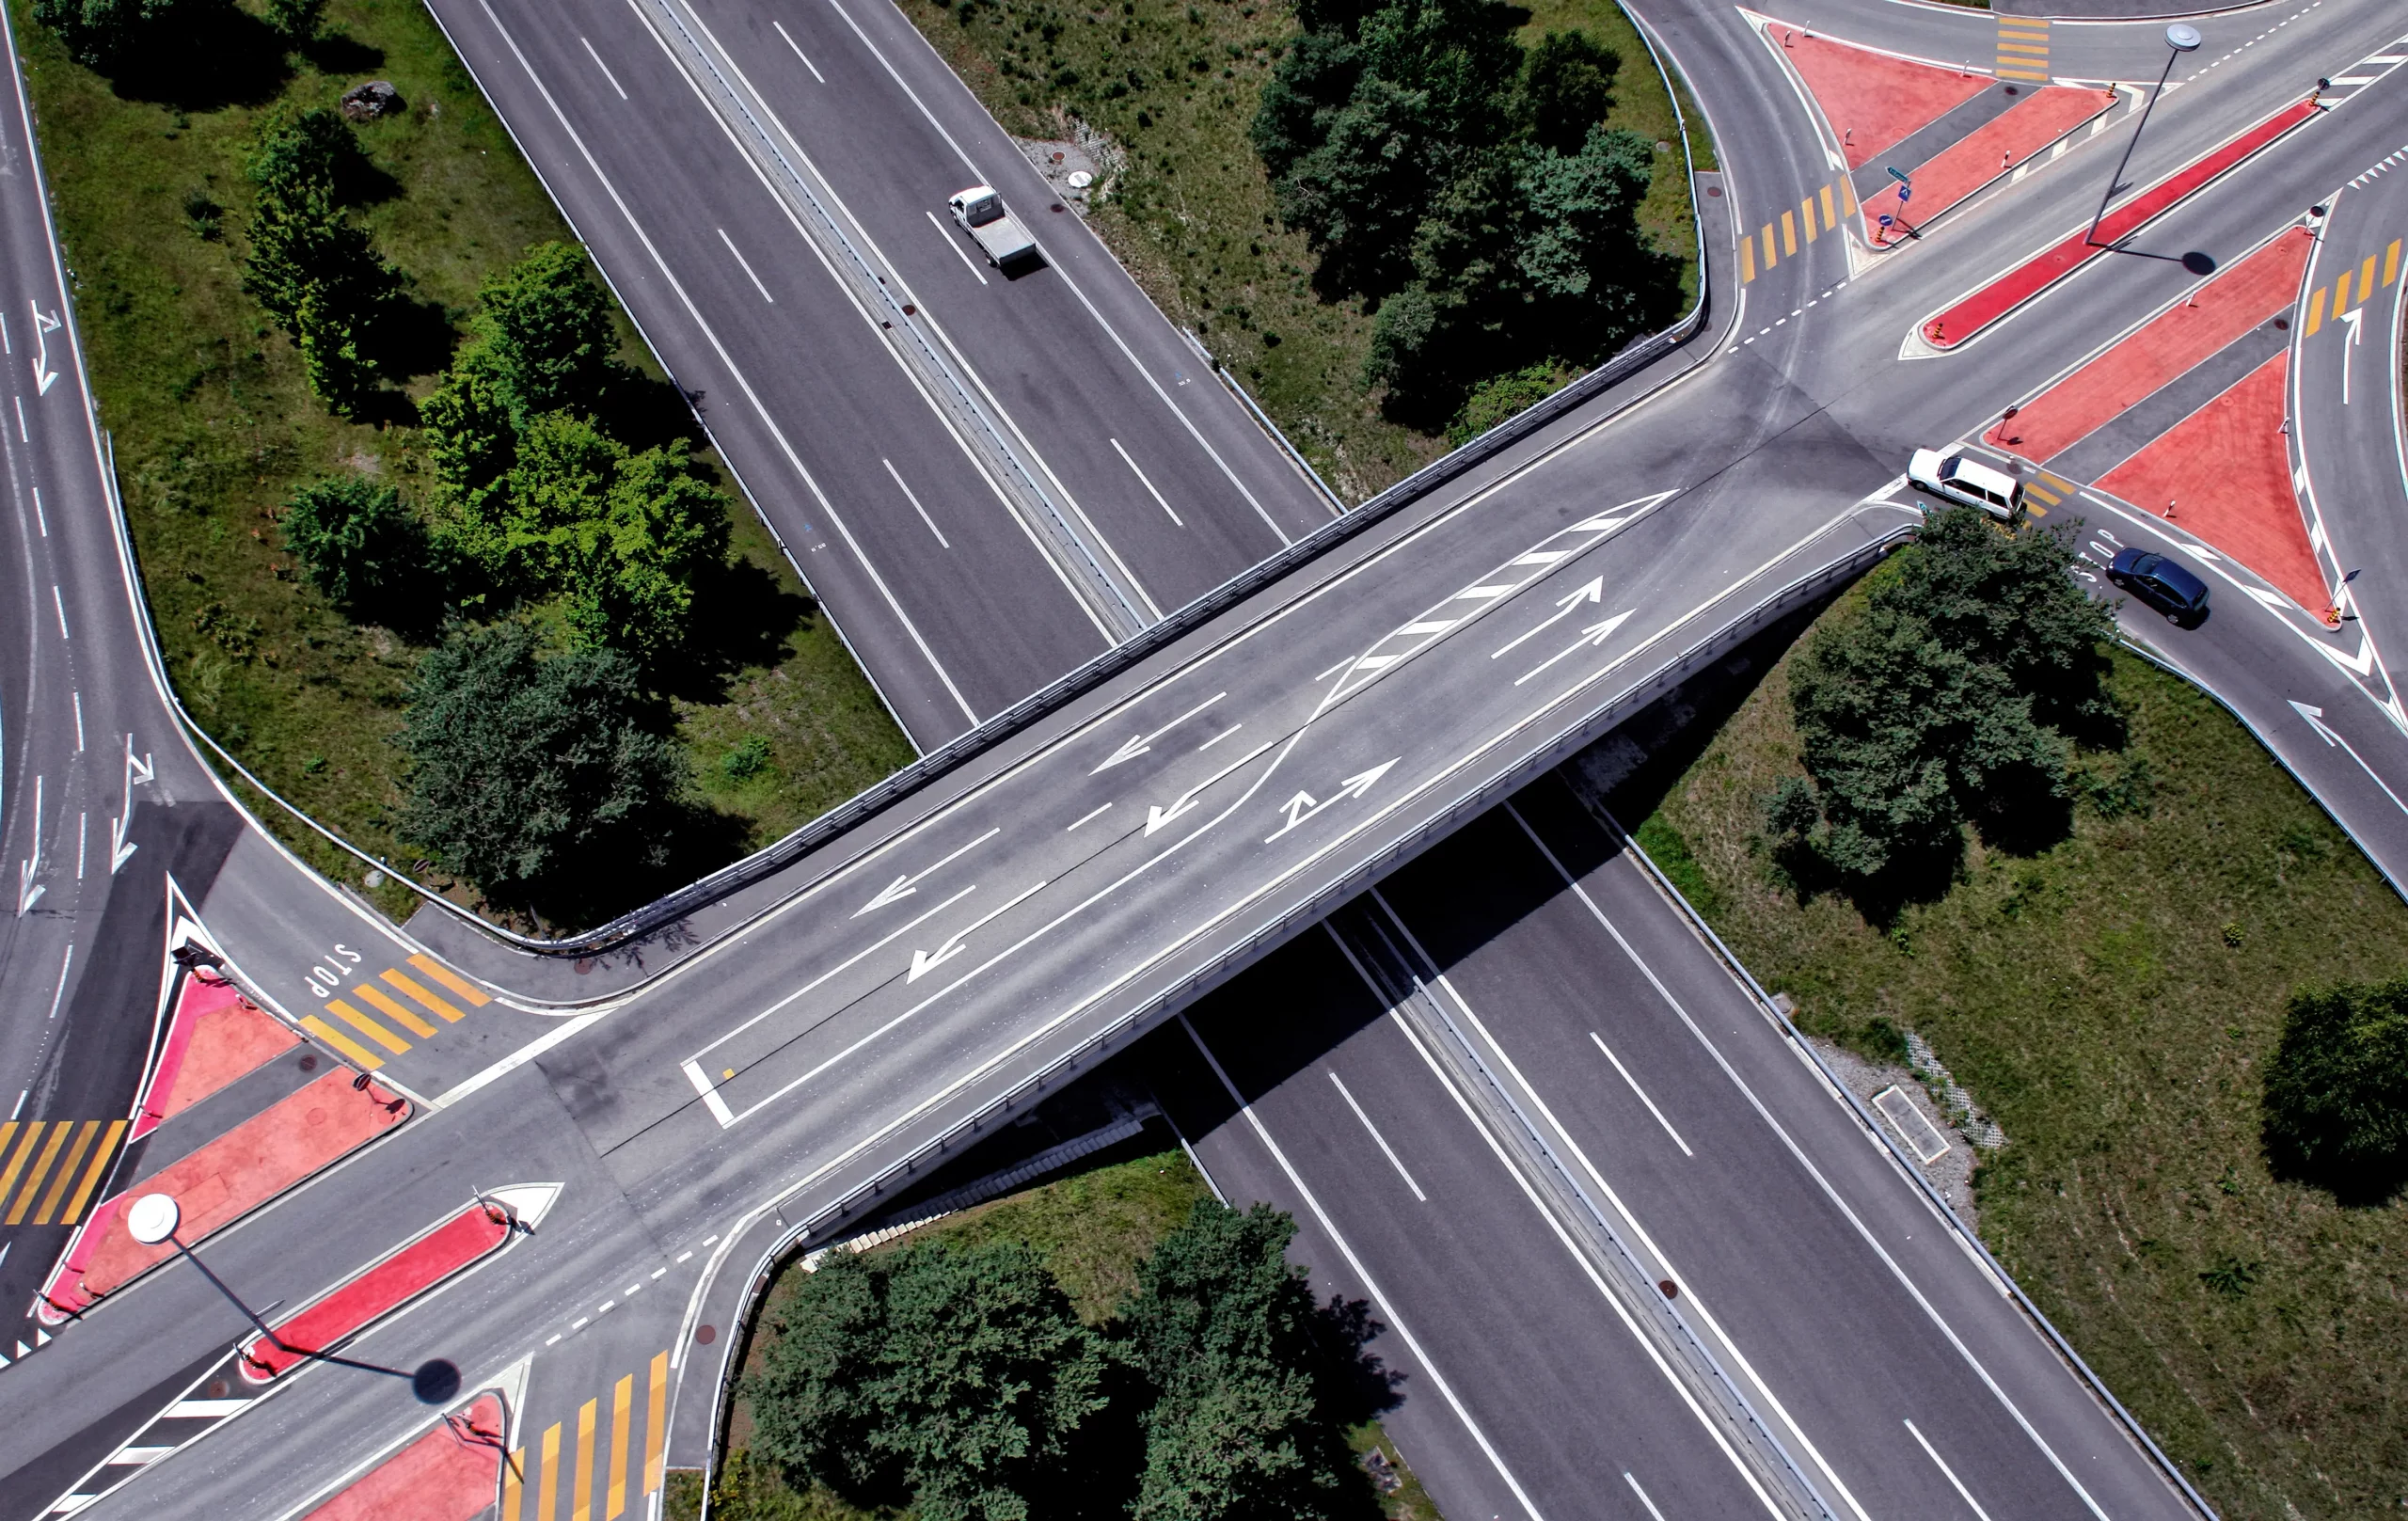 Aerial view of an overpass with intersecting roads and vehicles symbolizing the crossroads of pre and post-pandemic traffic trends.